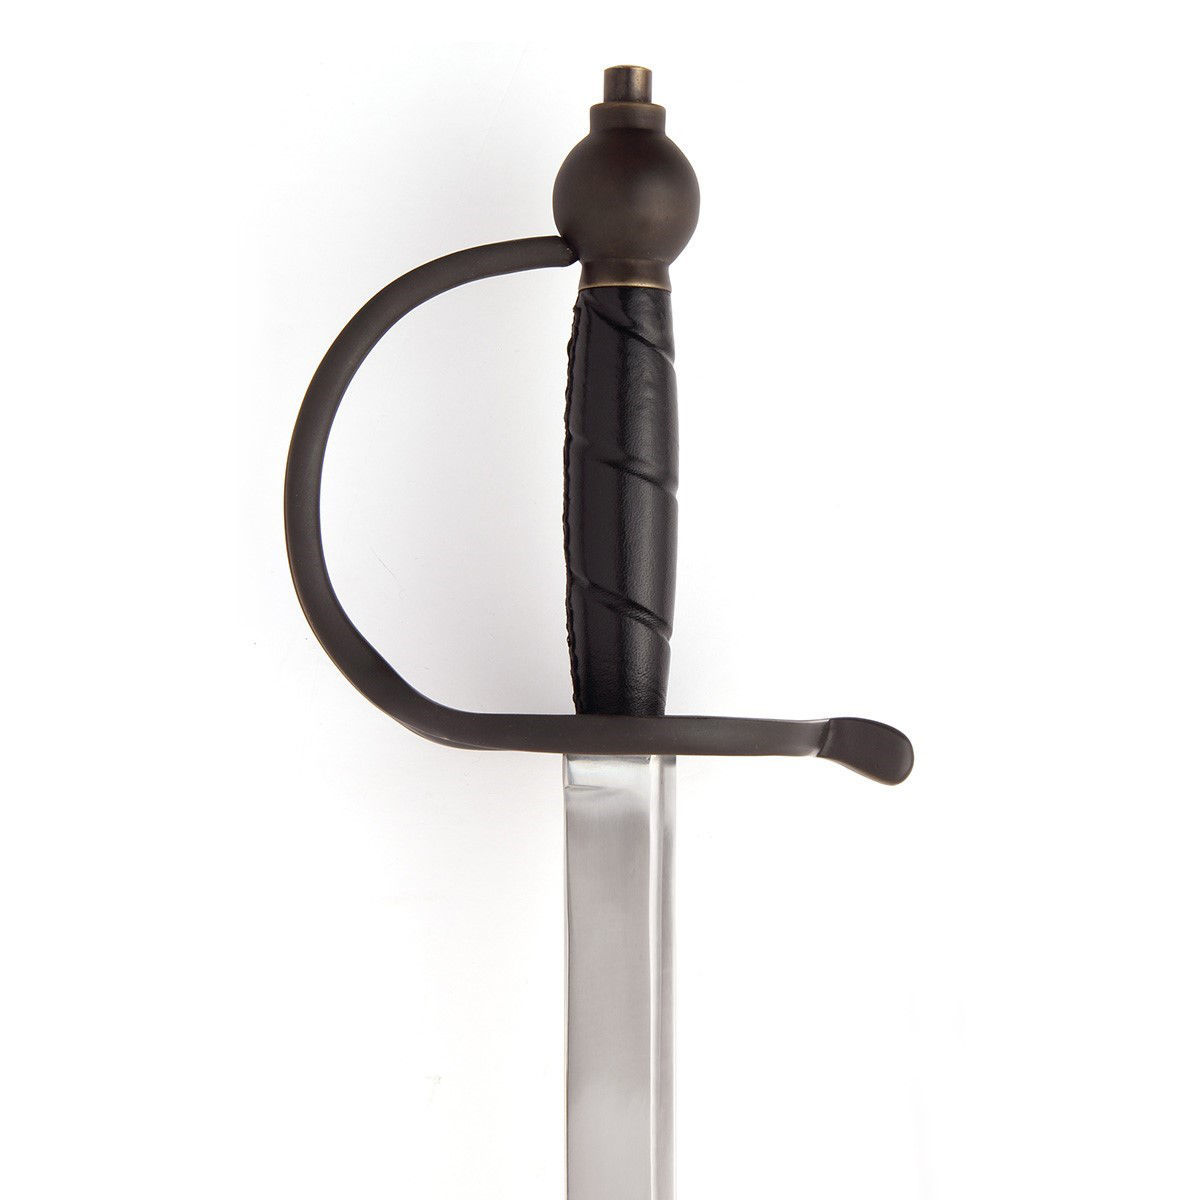 Pirate Captain's Hanger Sword by Windlass Steelcrafts